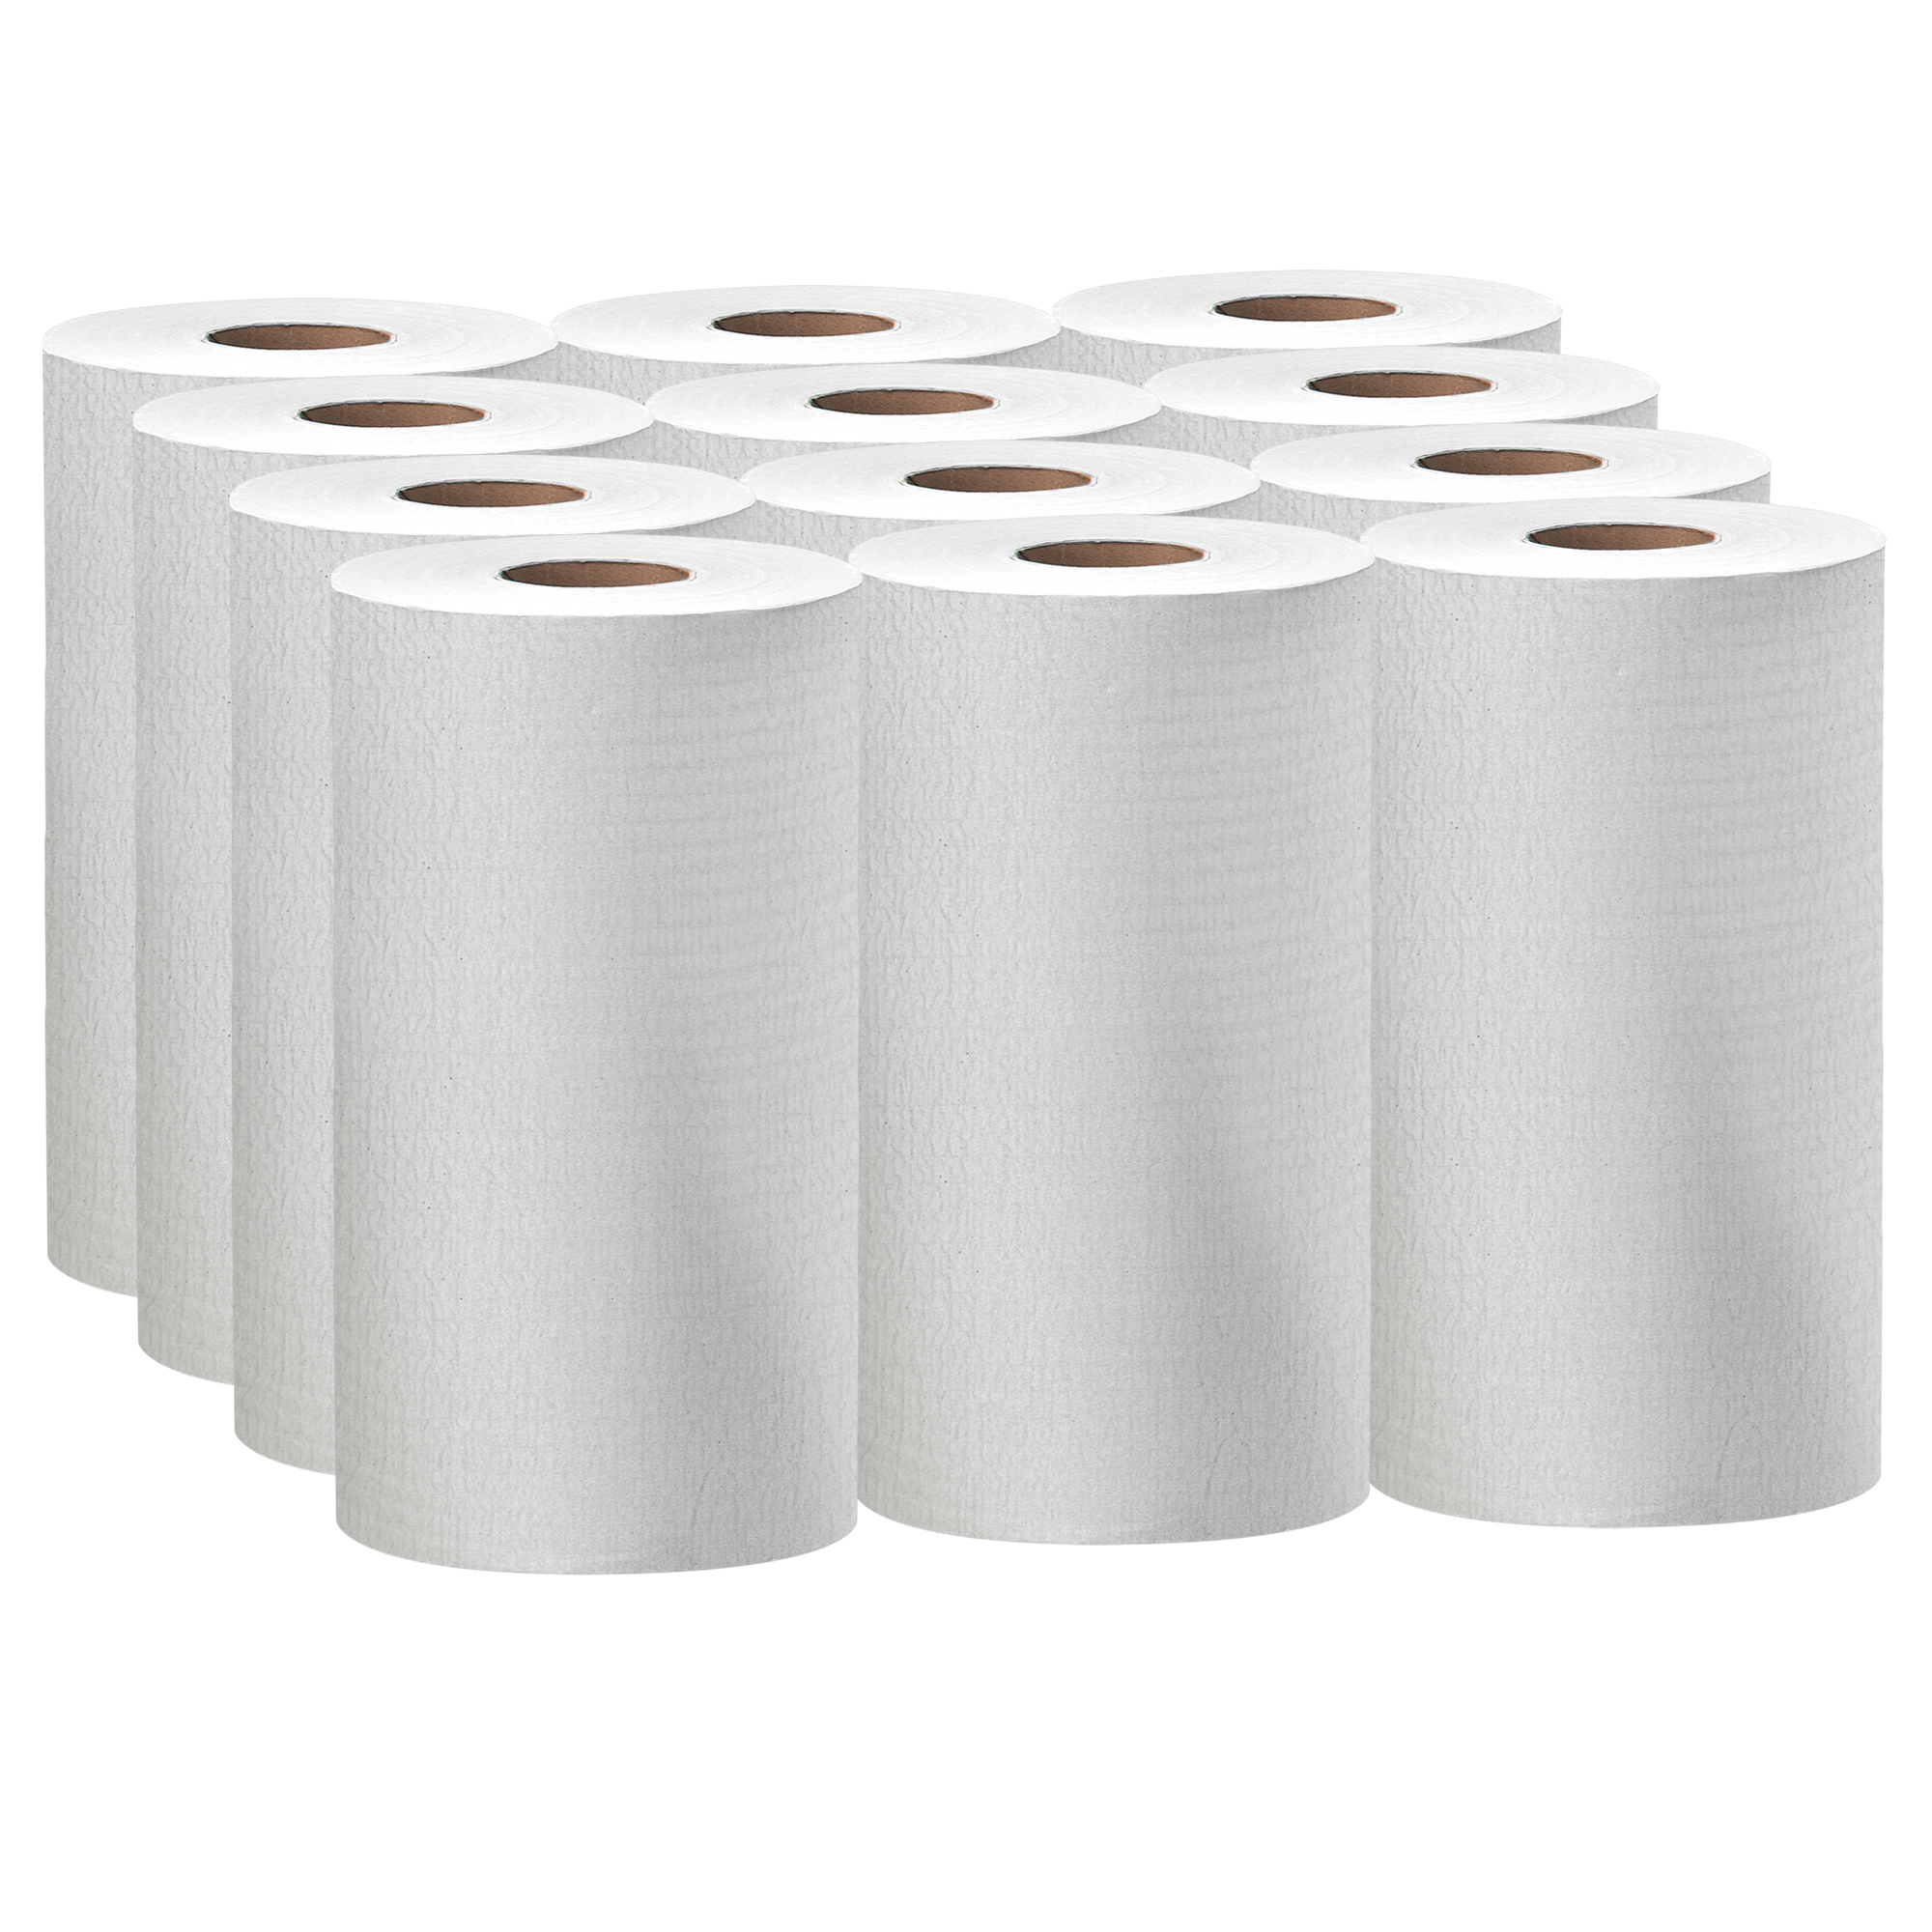 Picture of X60 Wipers, Small Roll, 9 4/5 x 13 2/5, White, 130/Roll, 12 Rolls/Carton